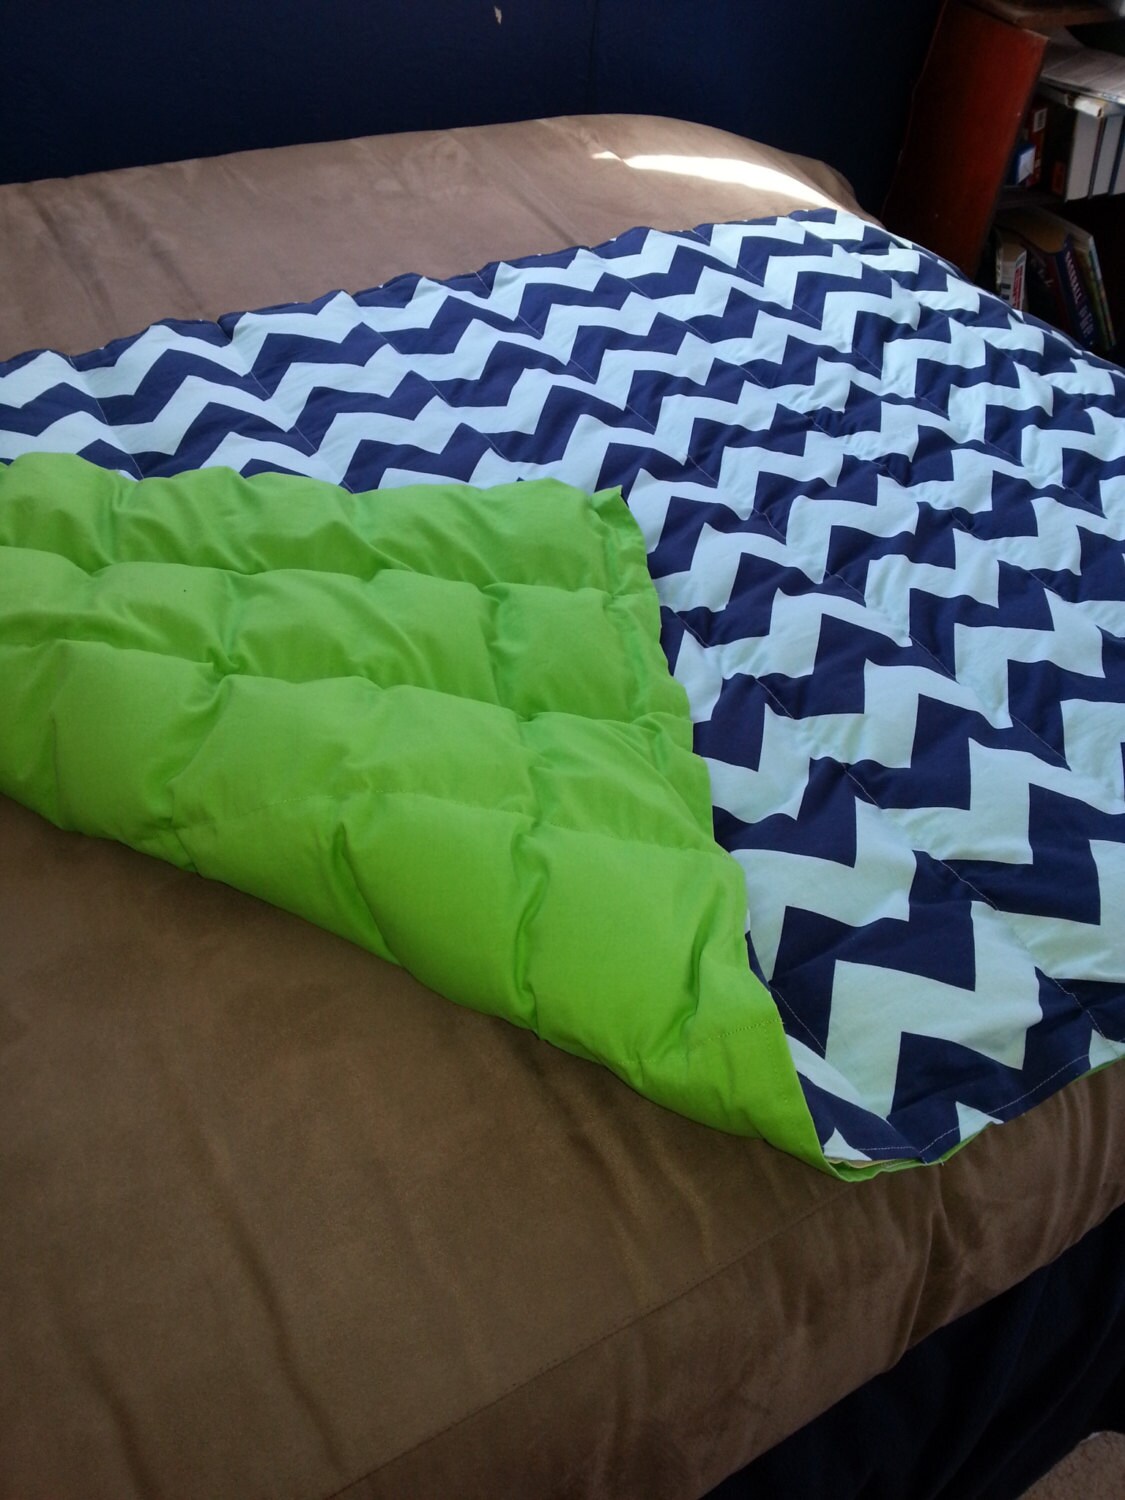 36 x 48 WEIGHTED BLANKET with innovative